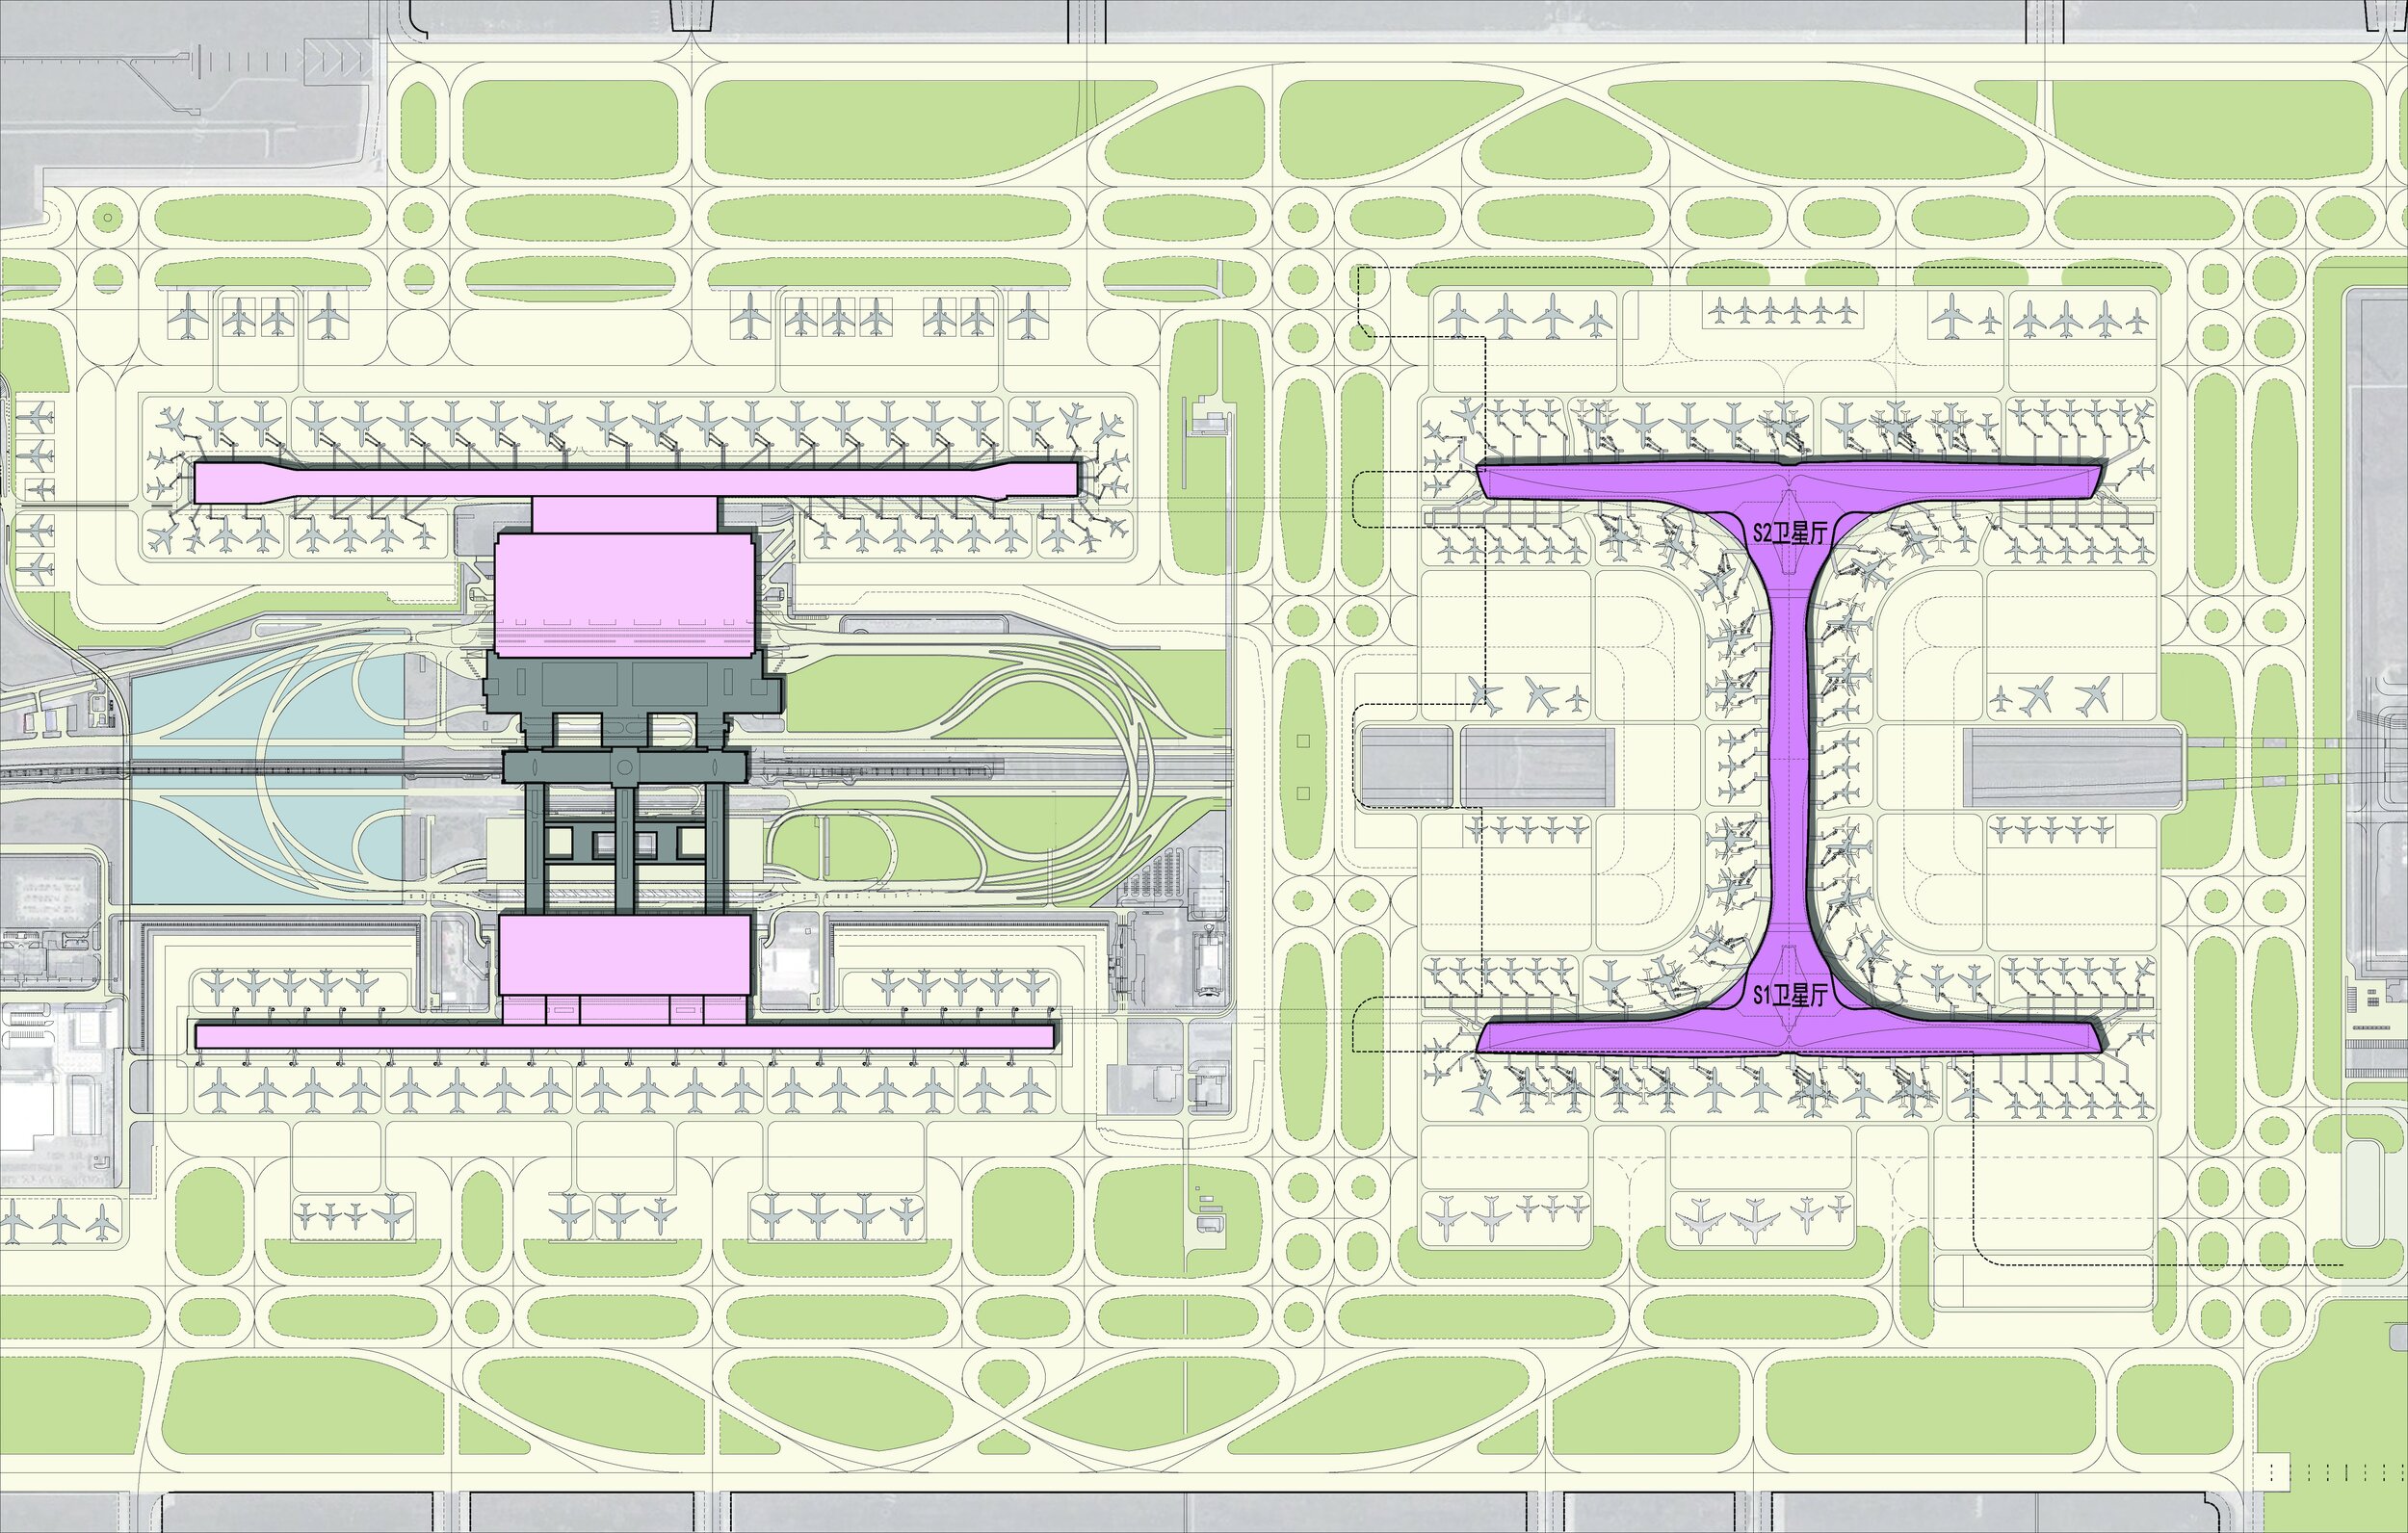 Site plan the Satellite Concourse at Shanghai International Airport